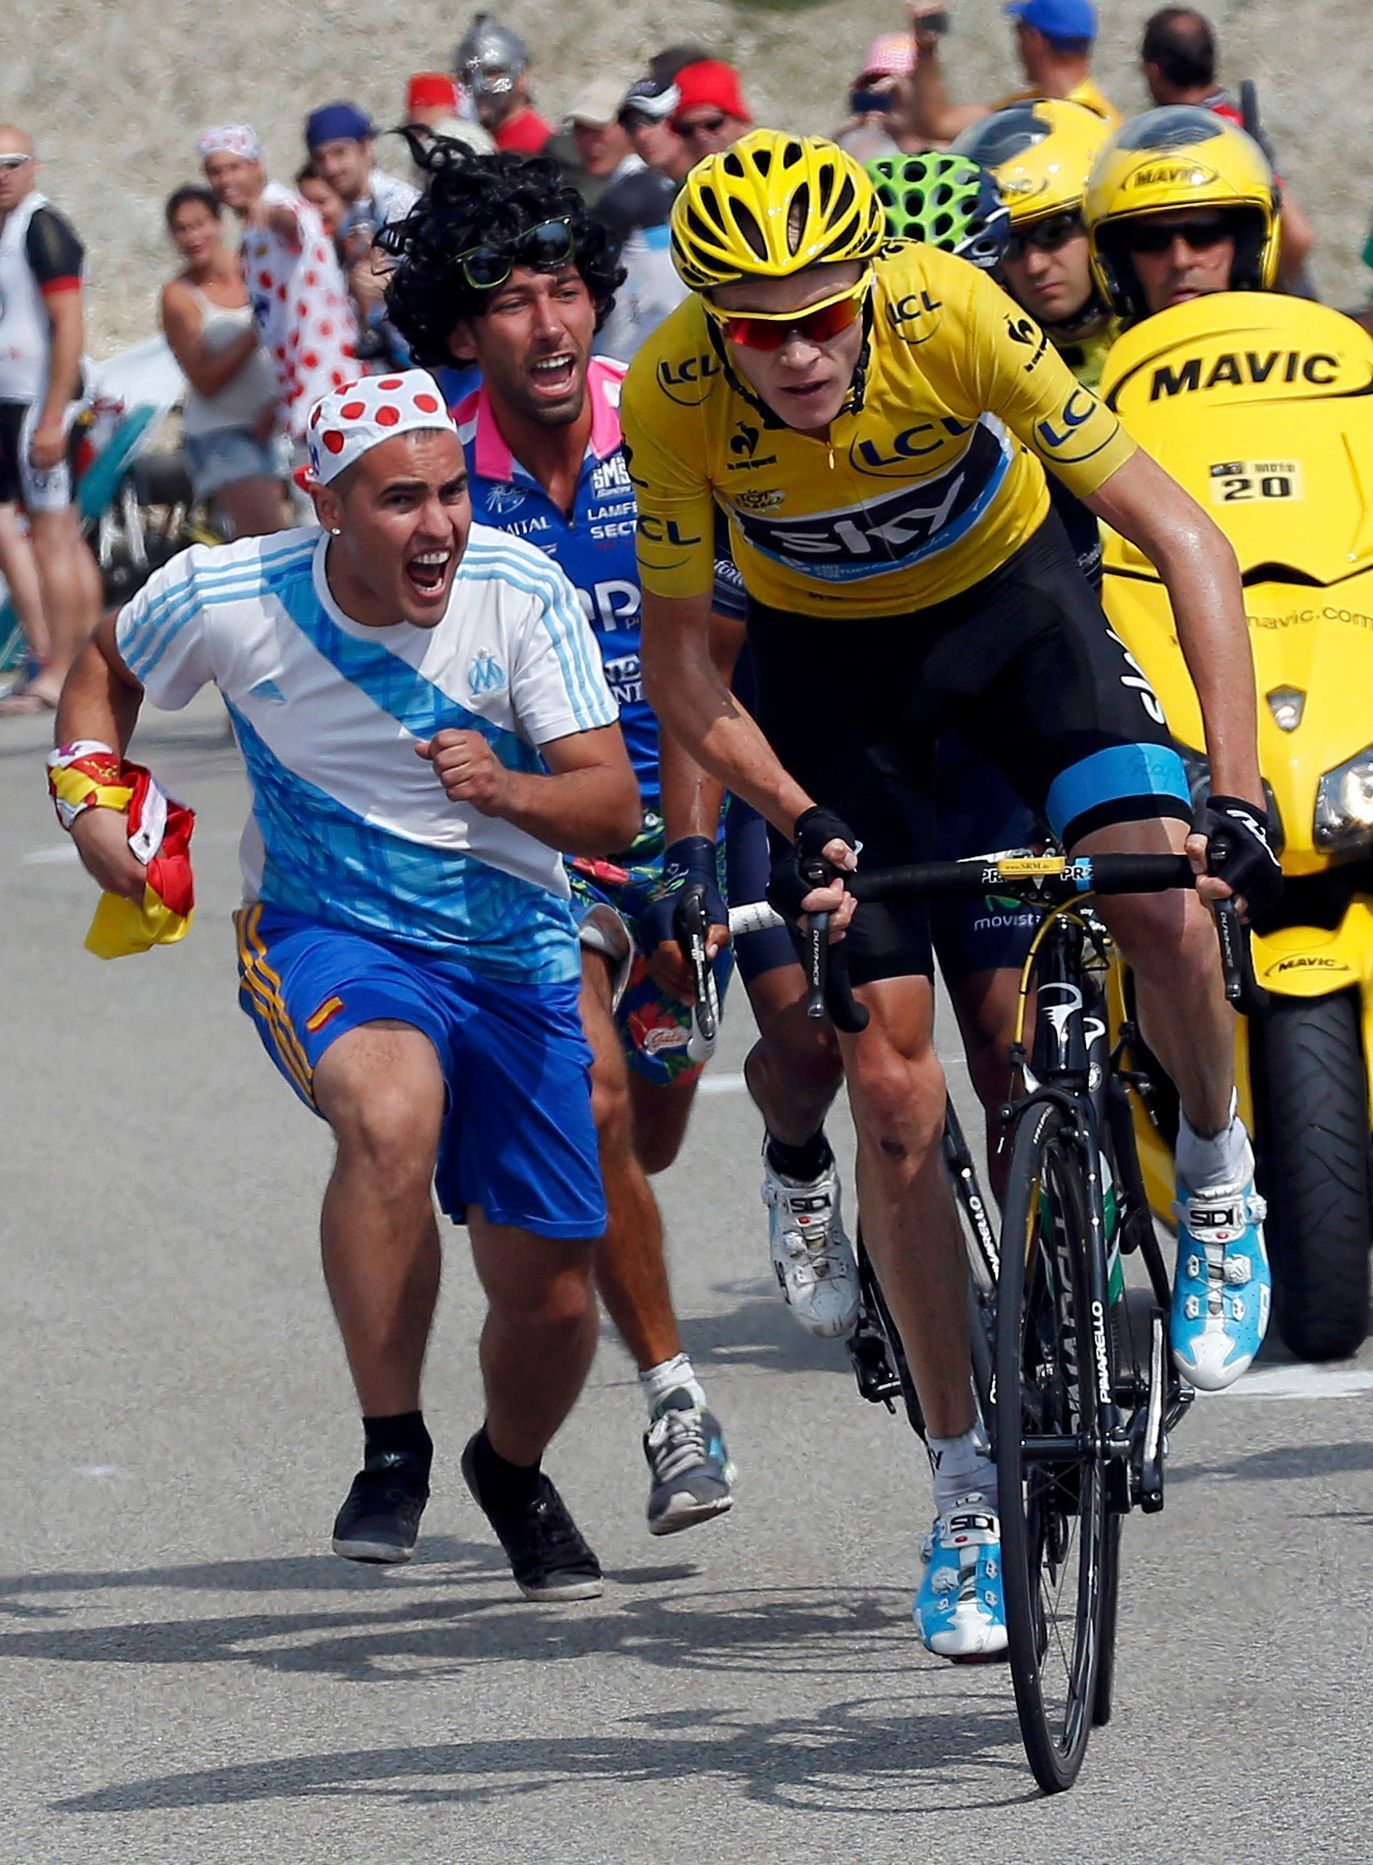 Race leader's yellow jersey Team Sky rider Froome of Britain